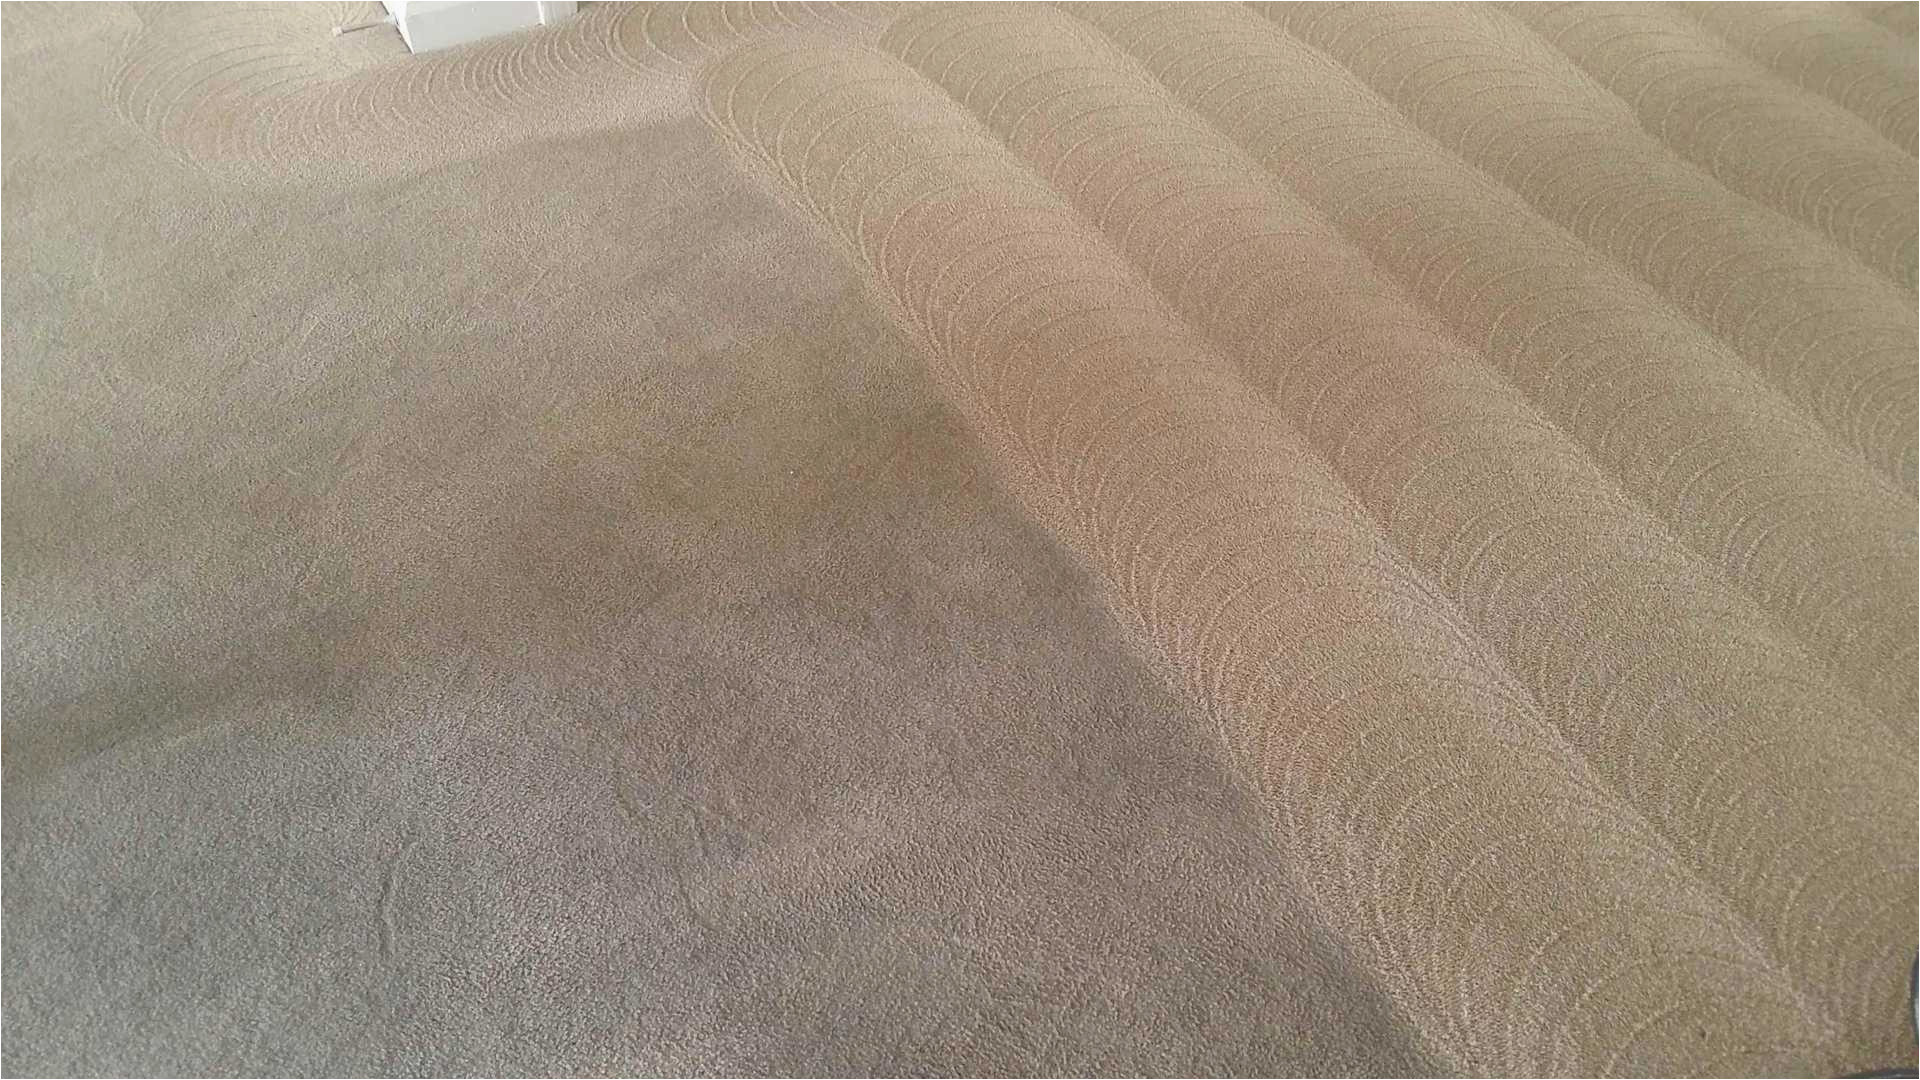 Area Rug Cleaning Roanoke Va Sci-tech Carpet Cleaning Get Clean Carpets today!